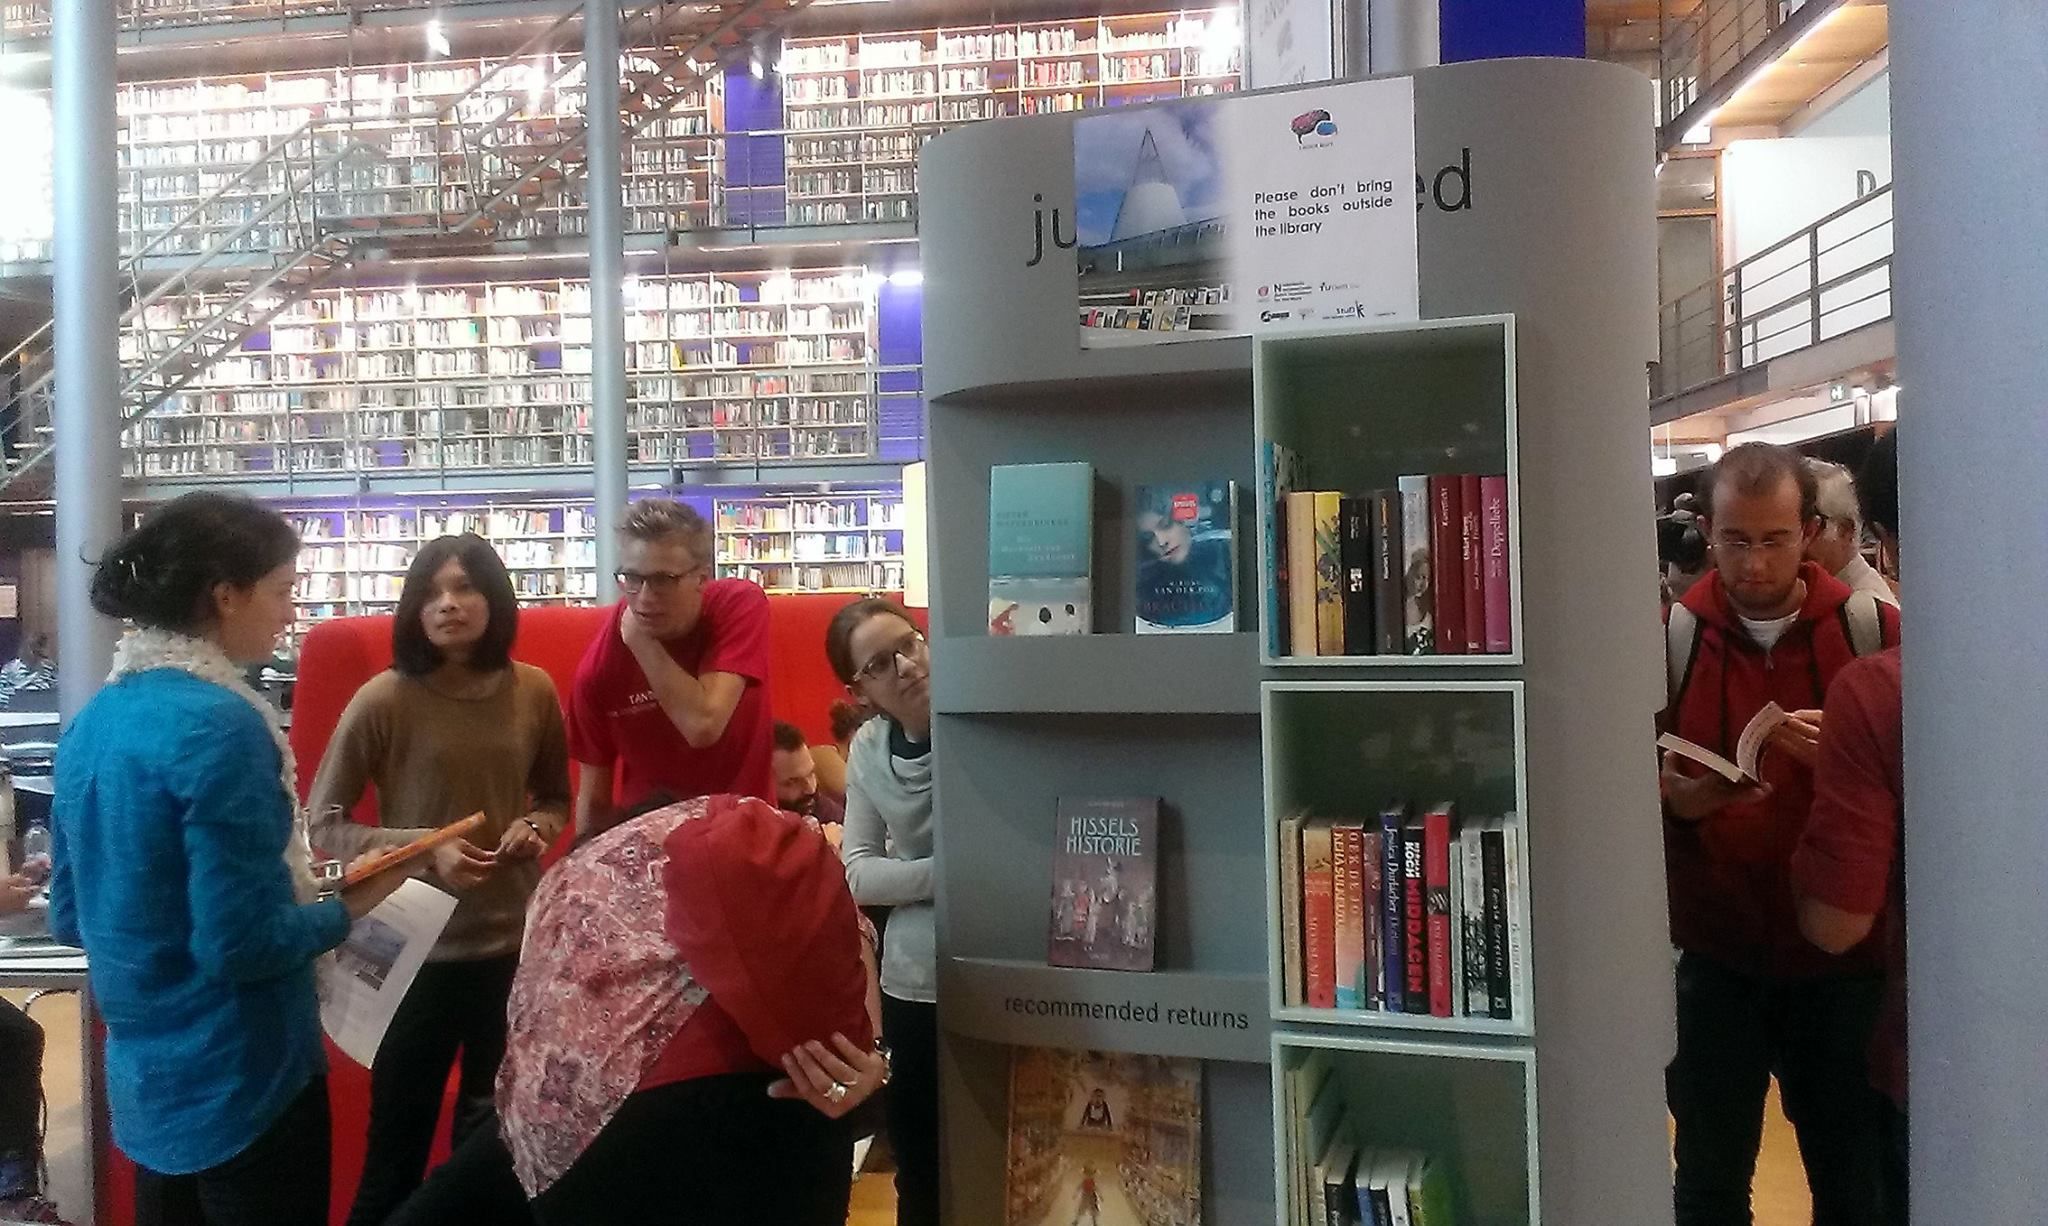 Students touring the airport library